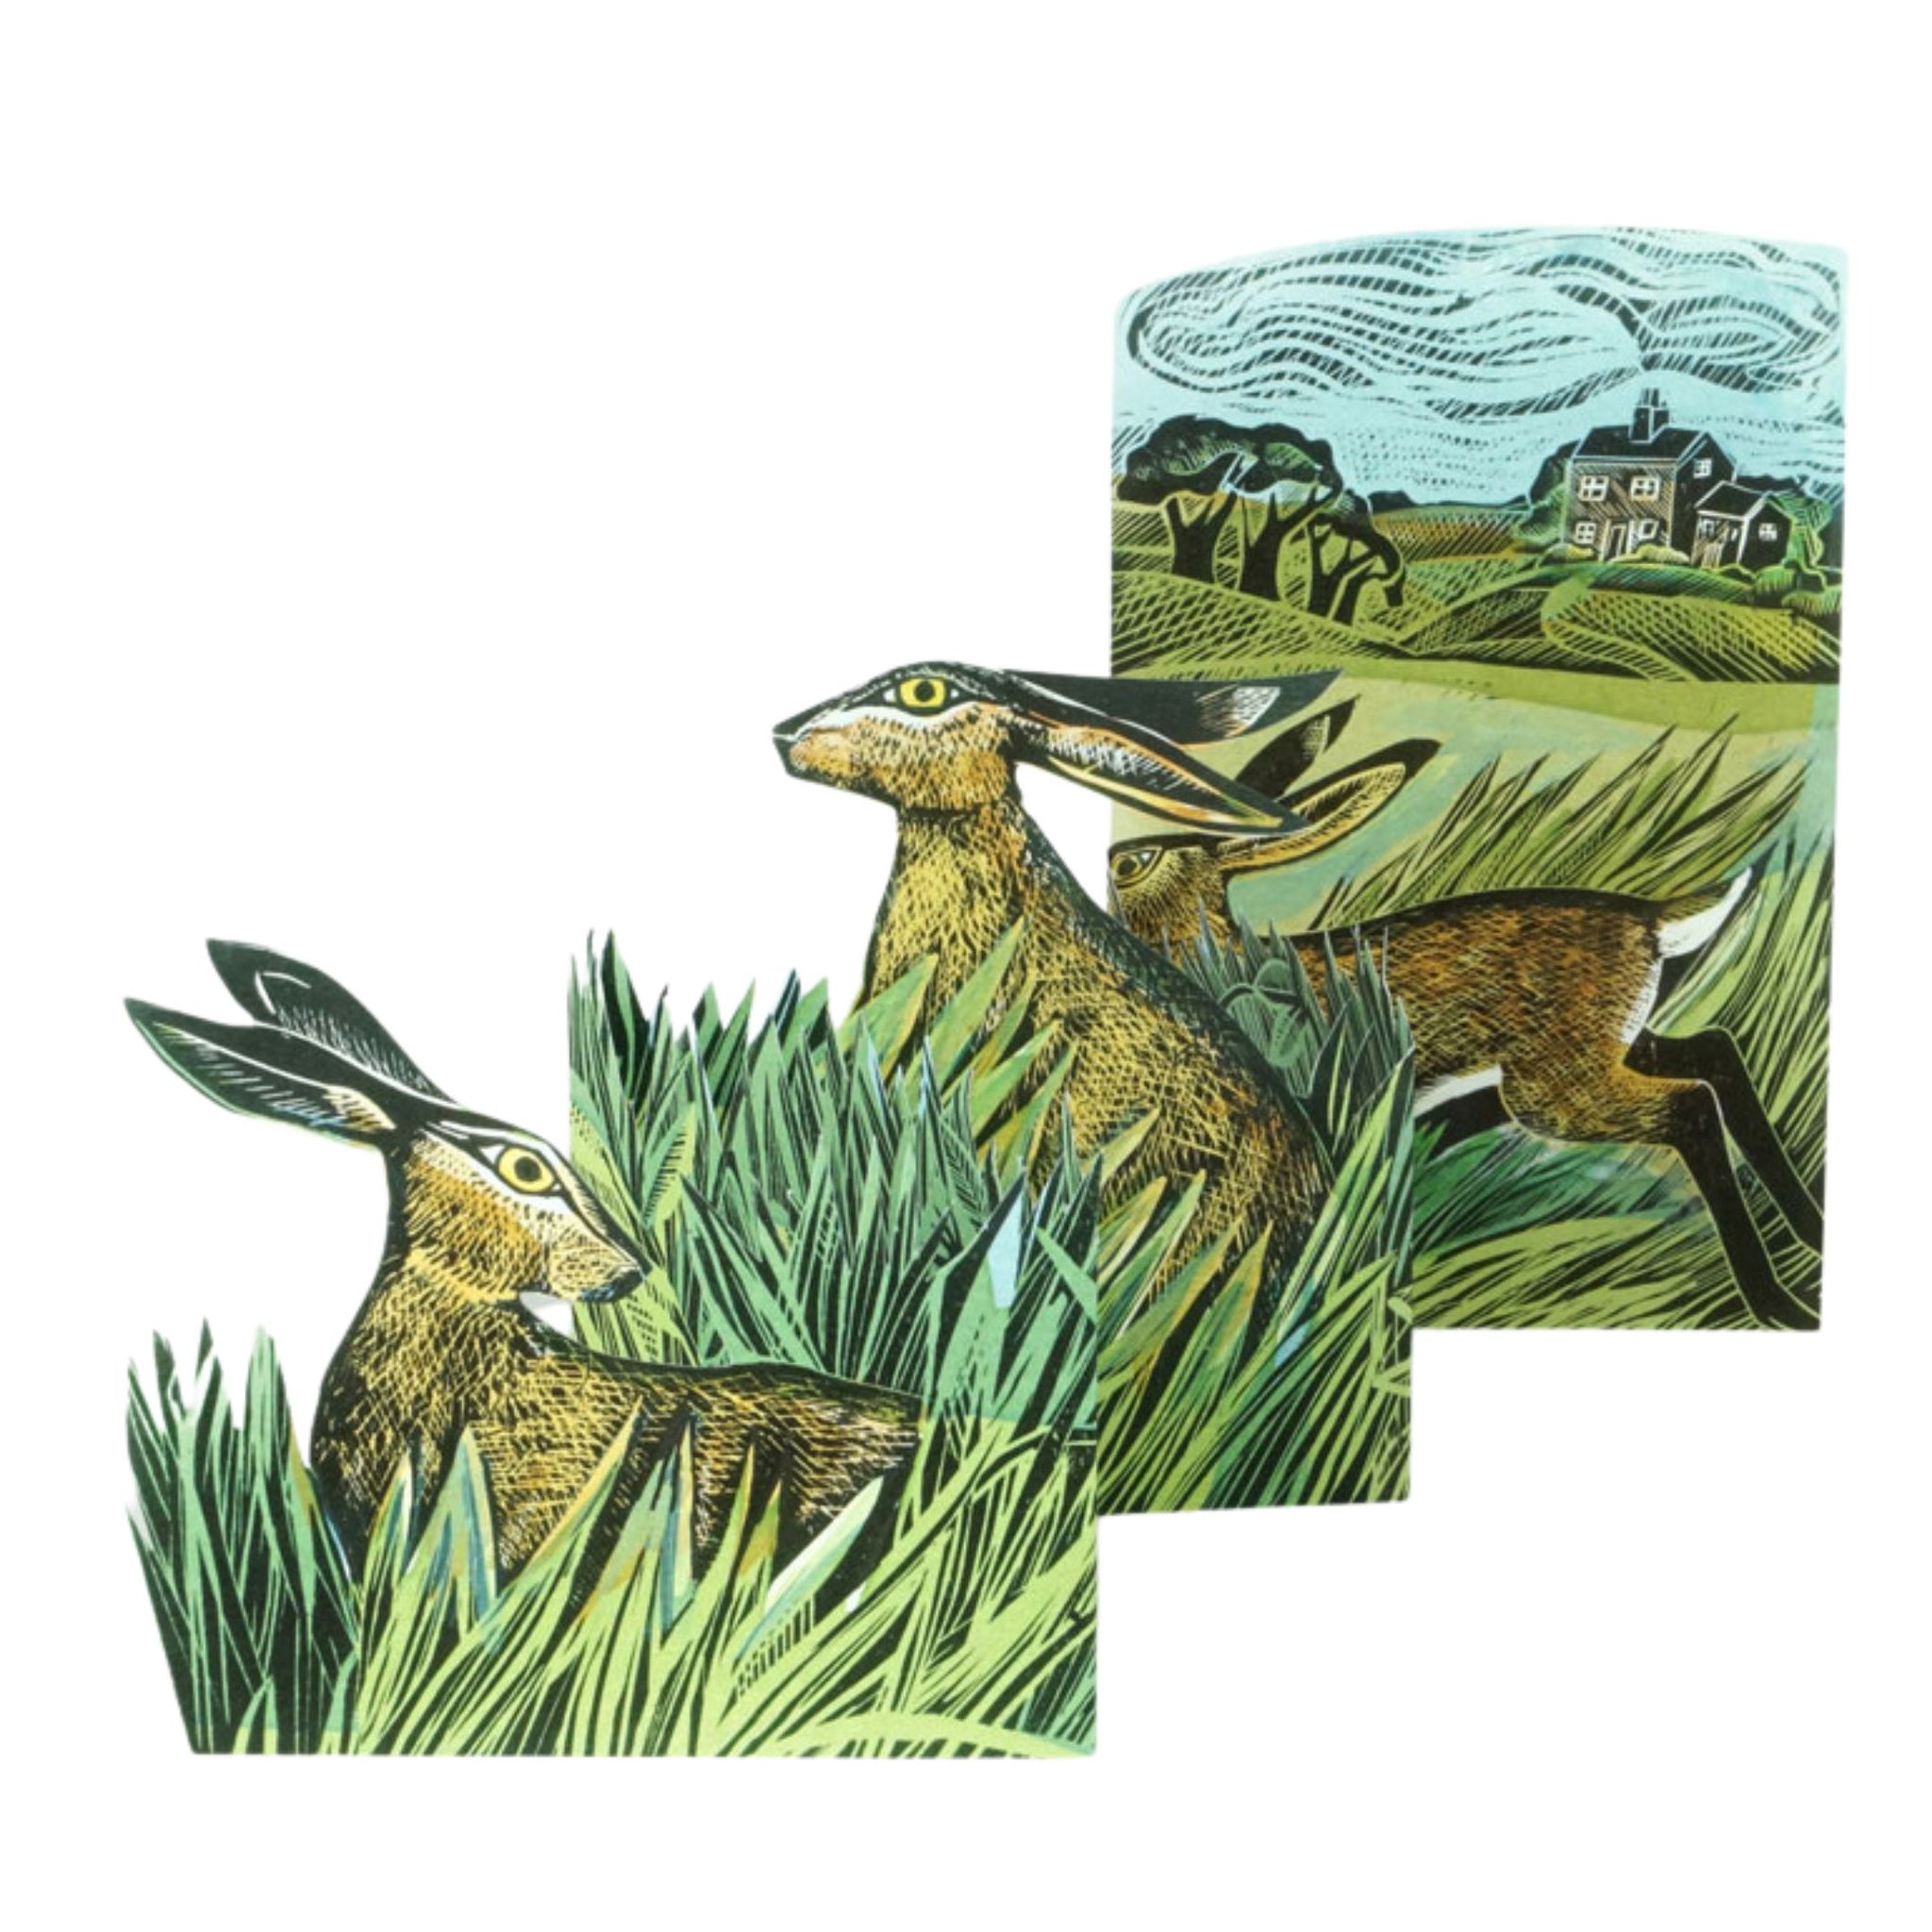 Hares and Open Fields trifold greetings card designed by Angela Harding. 